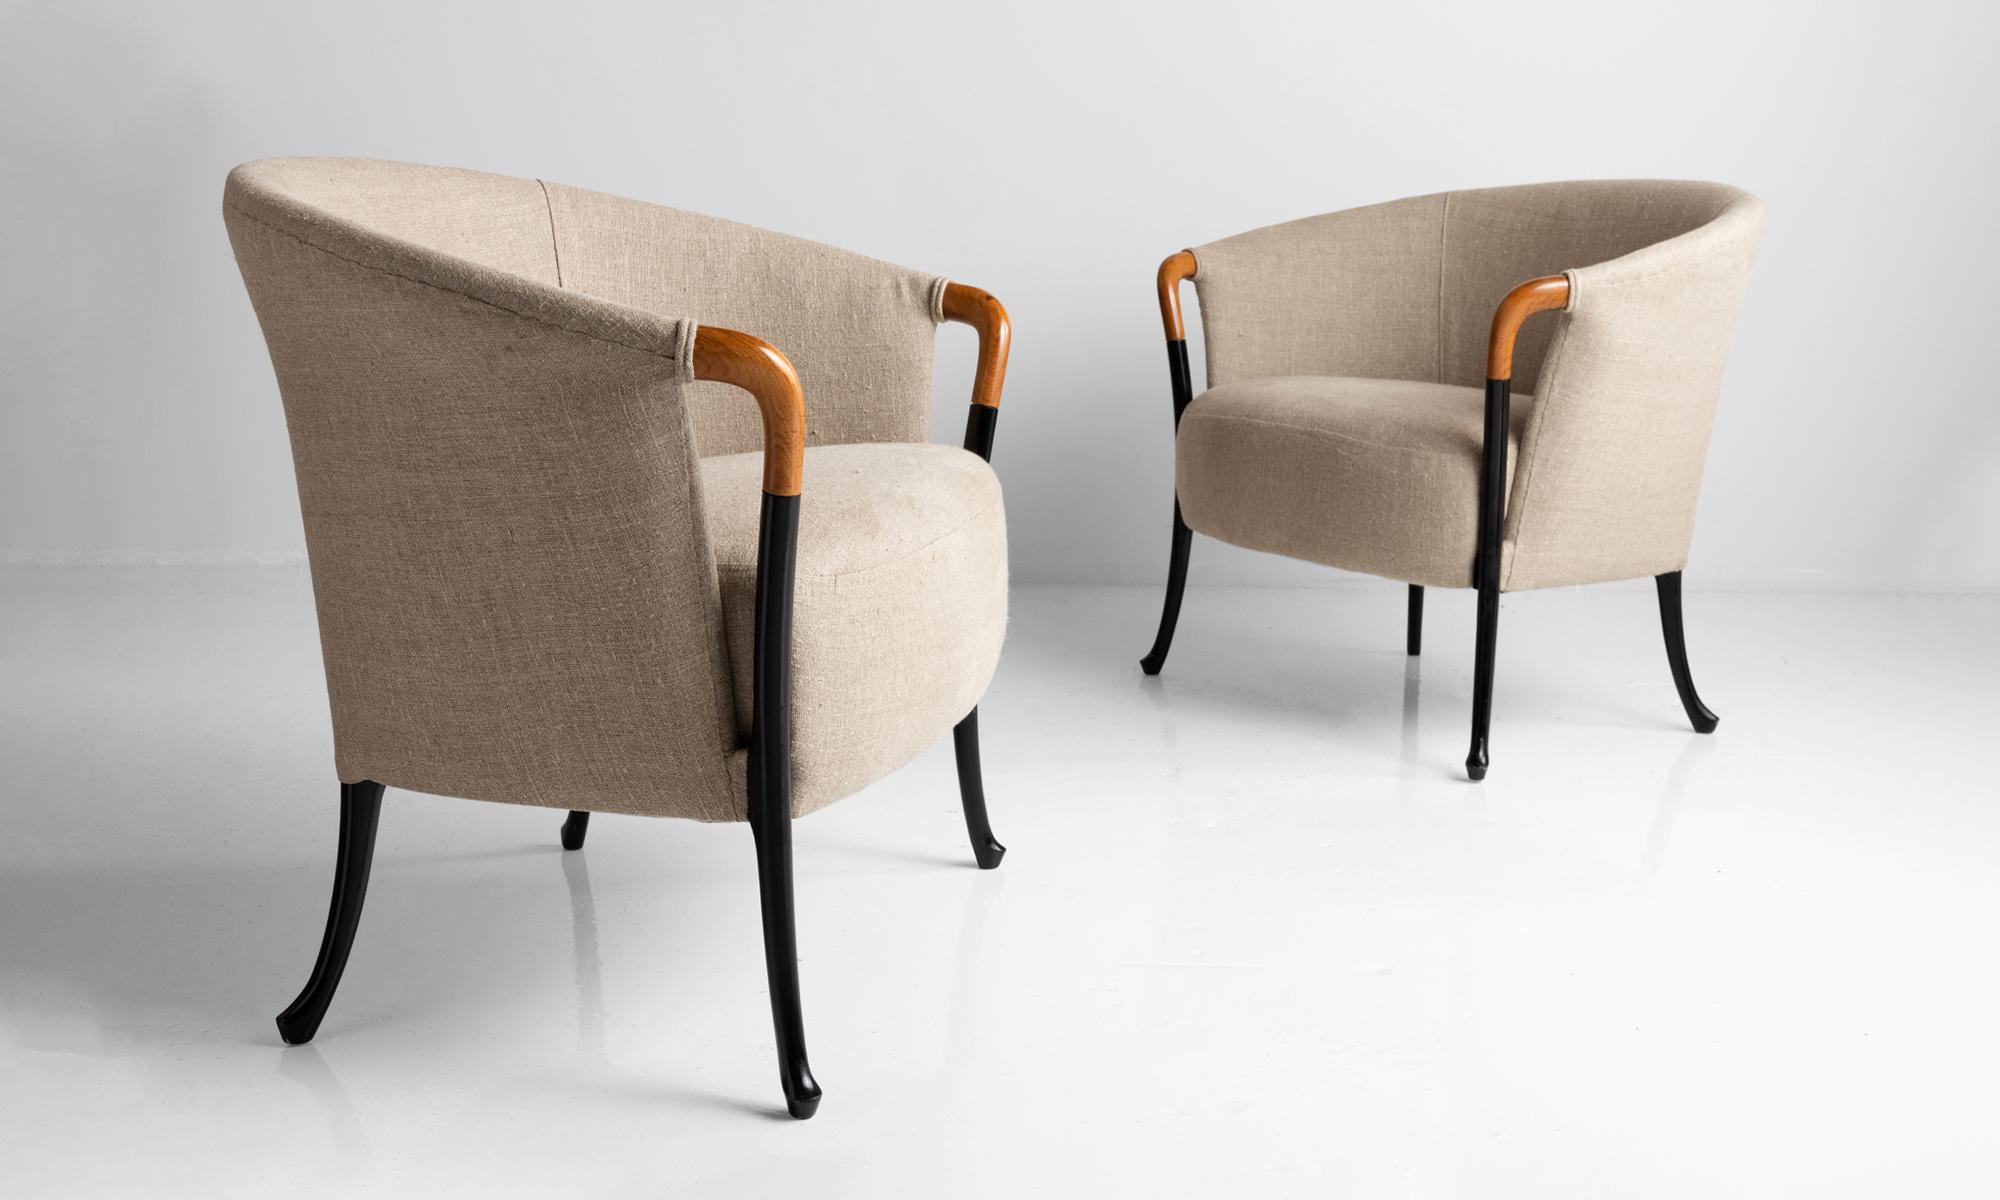 Designed by Umberto Asnago and produced Giorgetti. Upholstered in linen with teak arms in original finish.